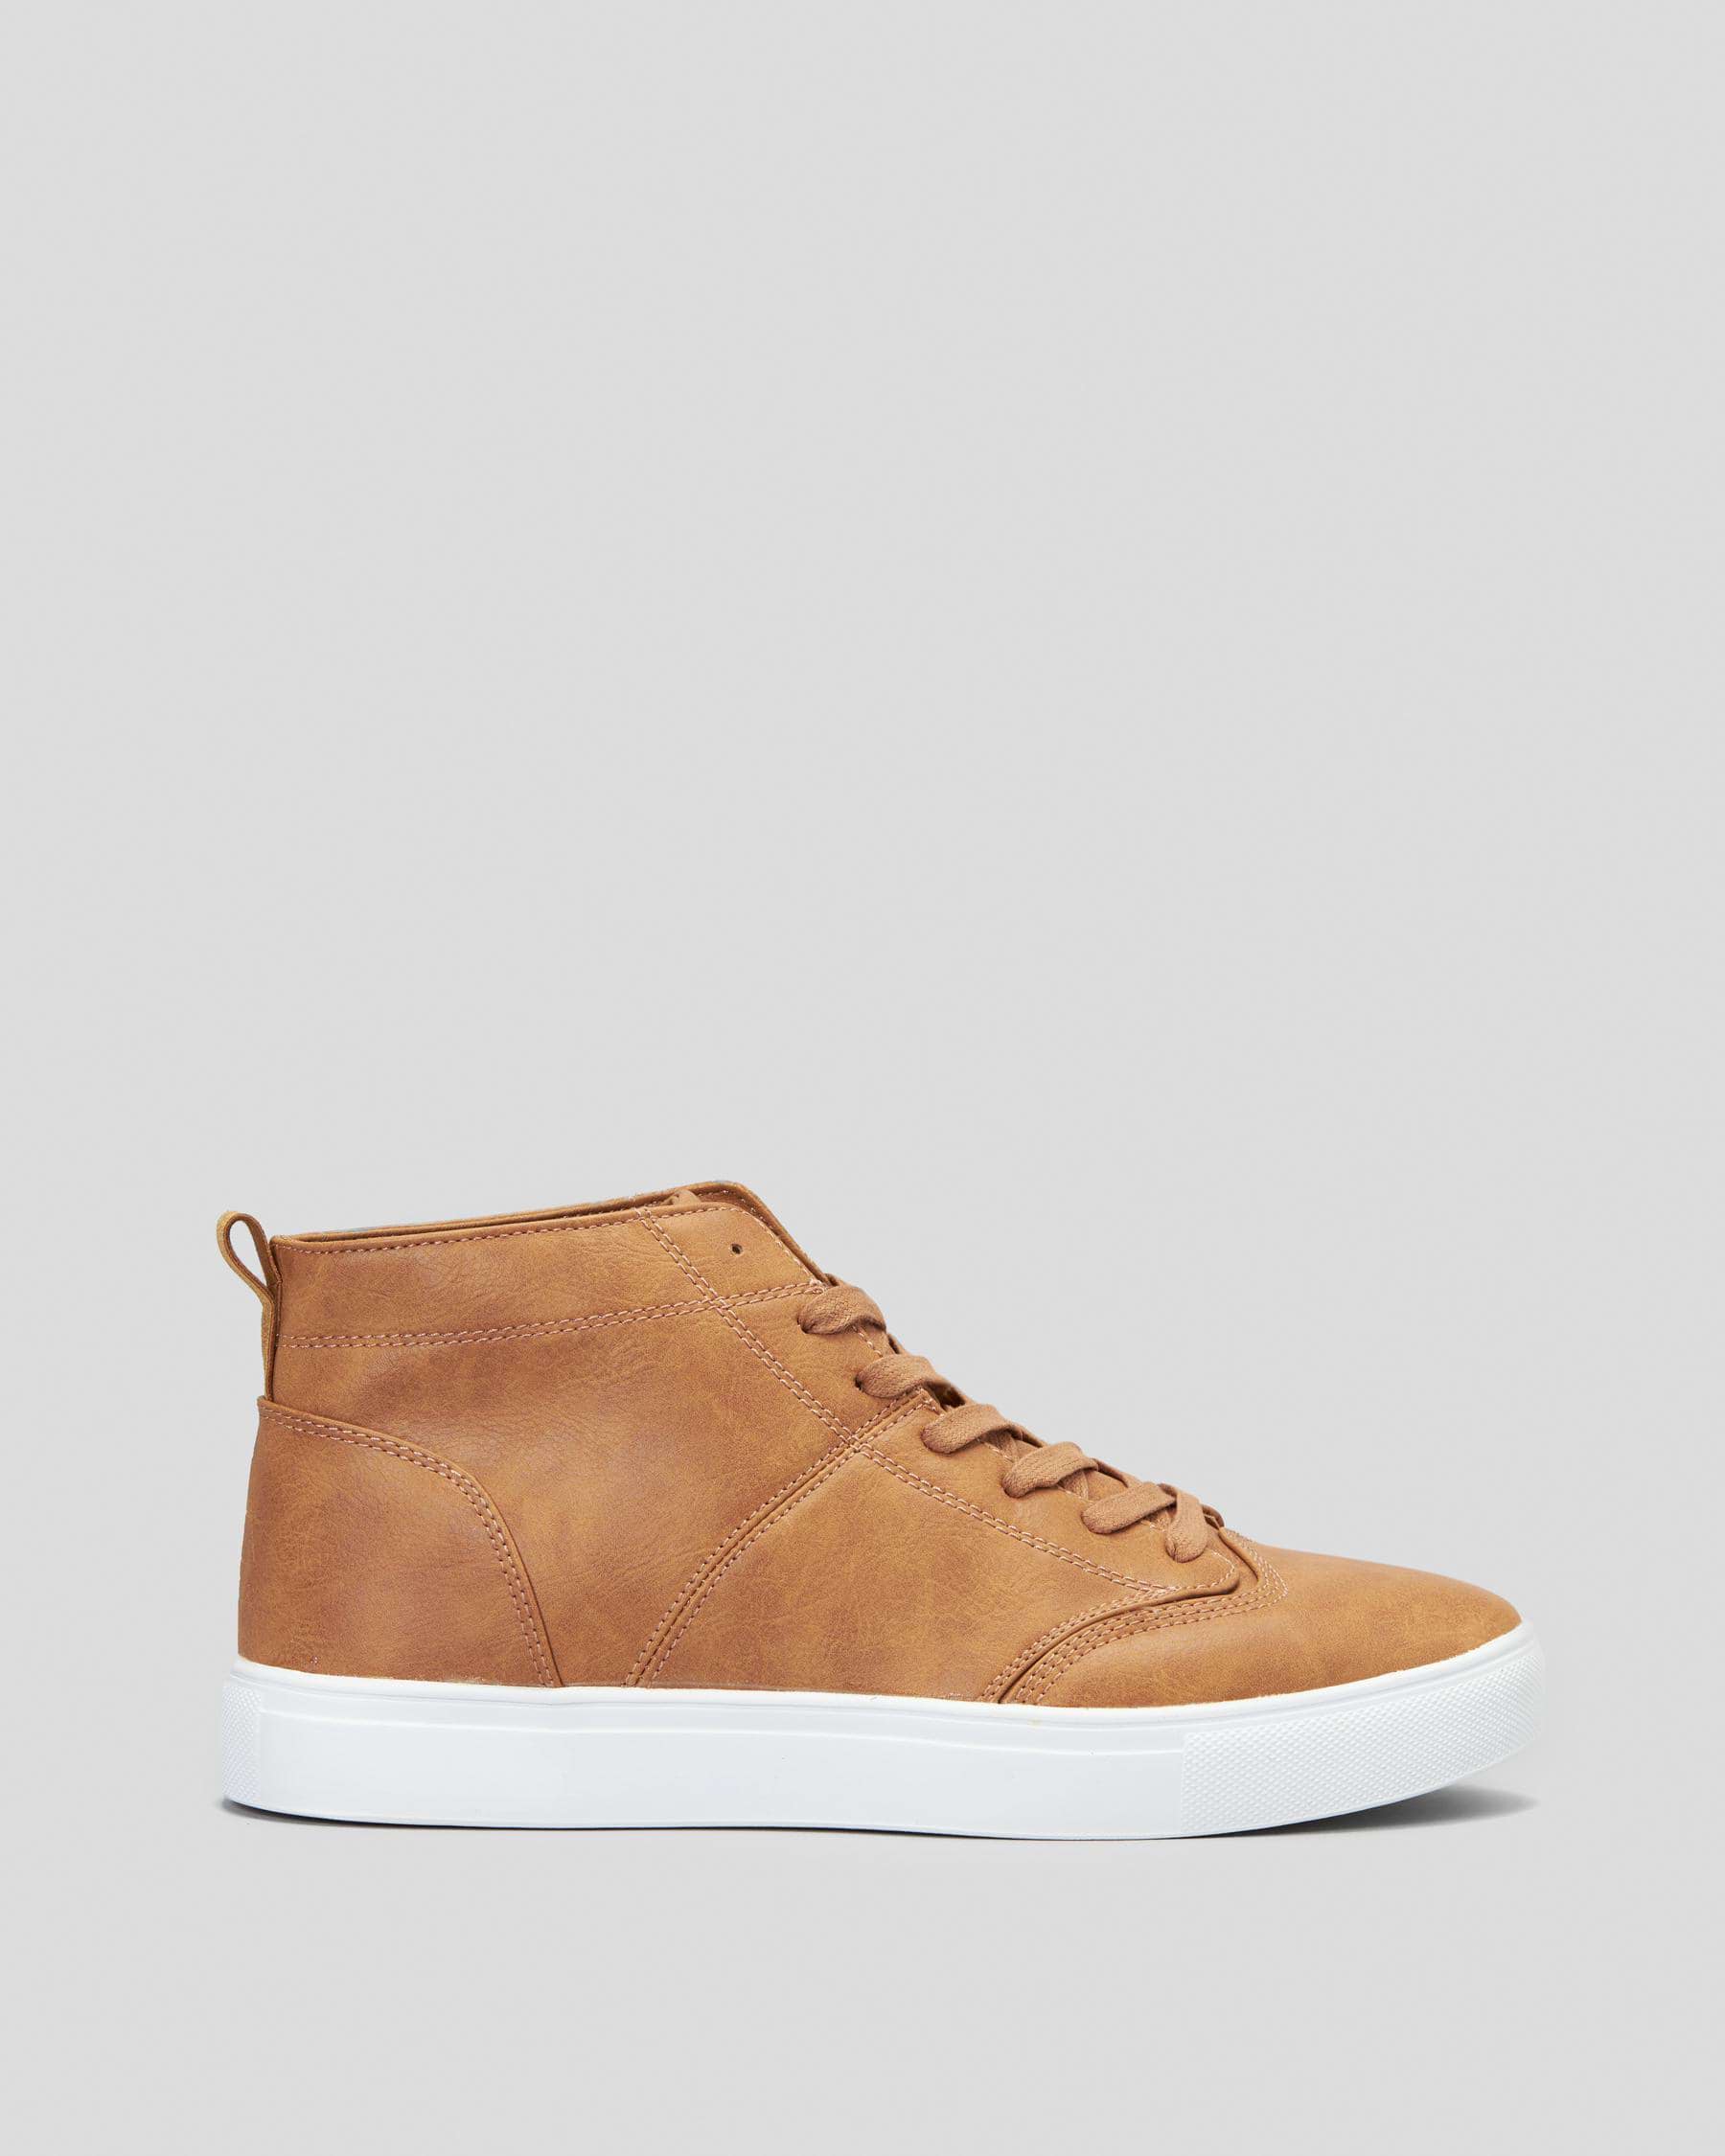 Shop Lucid Shelby Hi Cut Shoes In Brown - Fast Shipping & Easy Returns ...